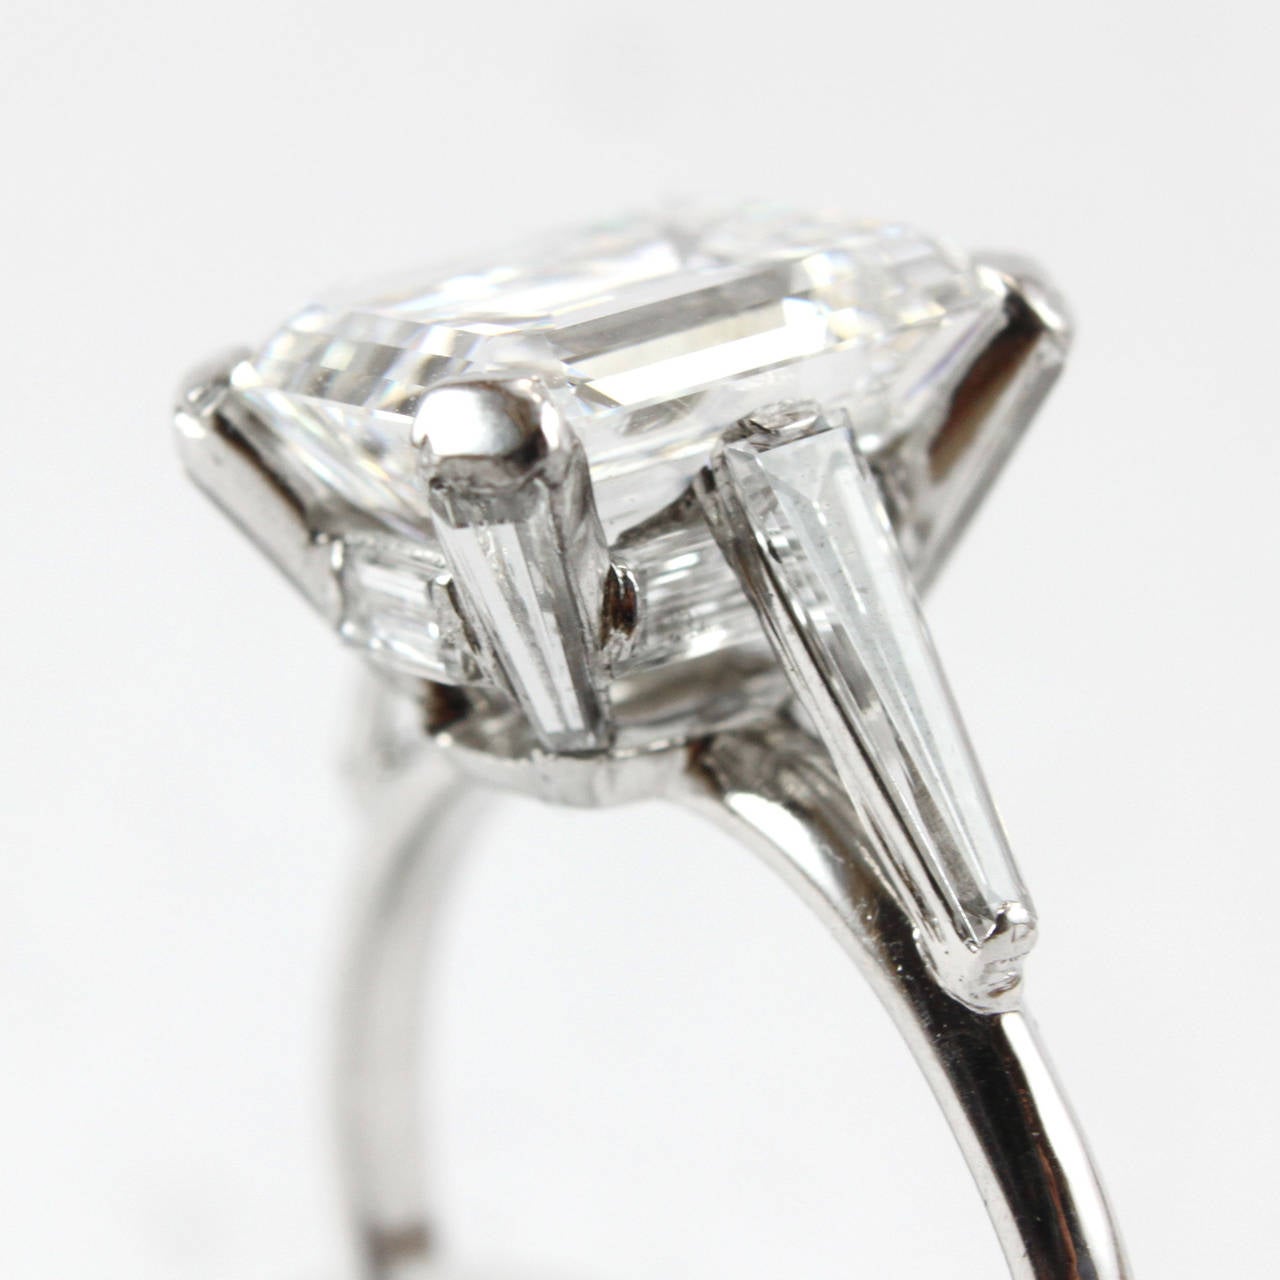 A solitaire ring with a beautiful 4.20ct GIA certified emerald cut diamond. It is very unusually surrounded by 10 tapered baguettes throughout the shank and prongs.

Weight: 4.20 carats
Color: E
Clarity: VS1
Fluorescence: none
Cut: